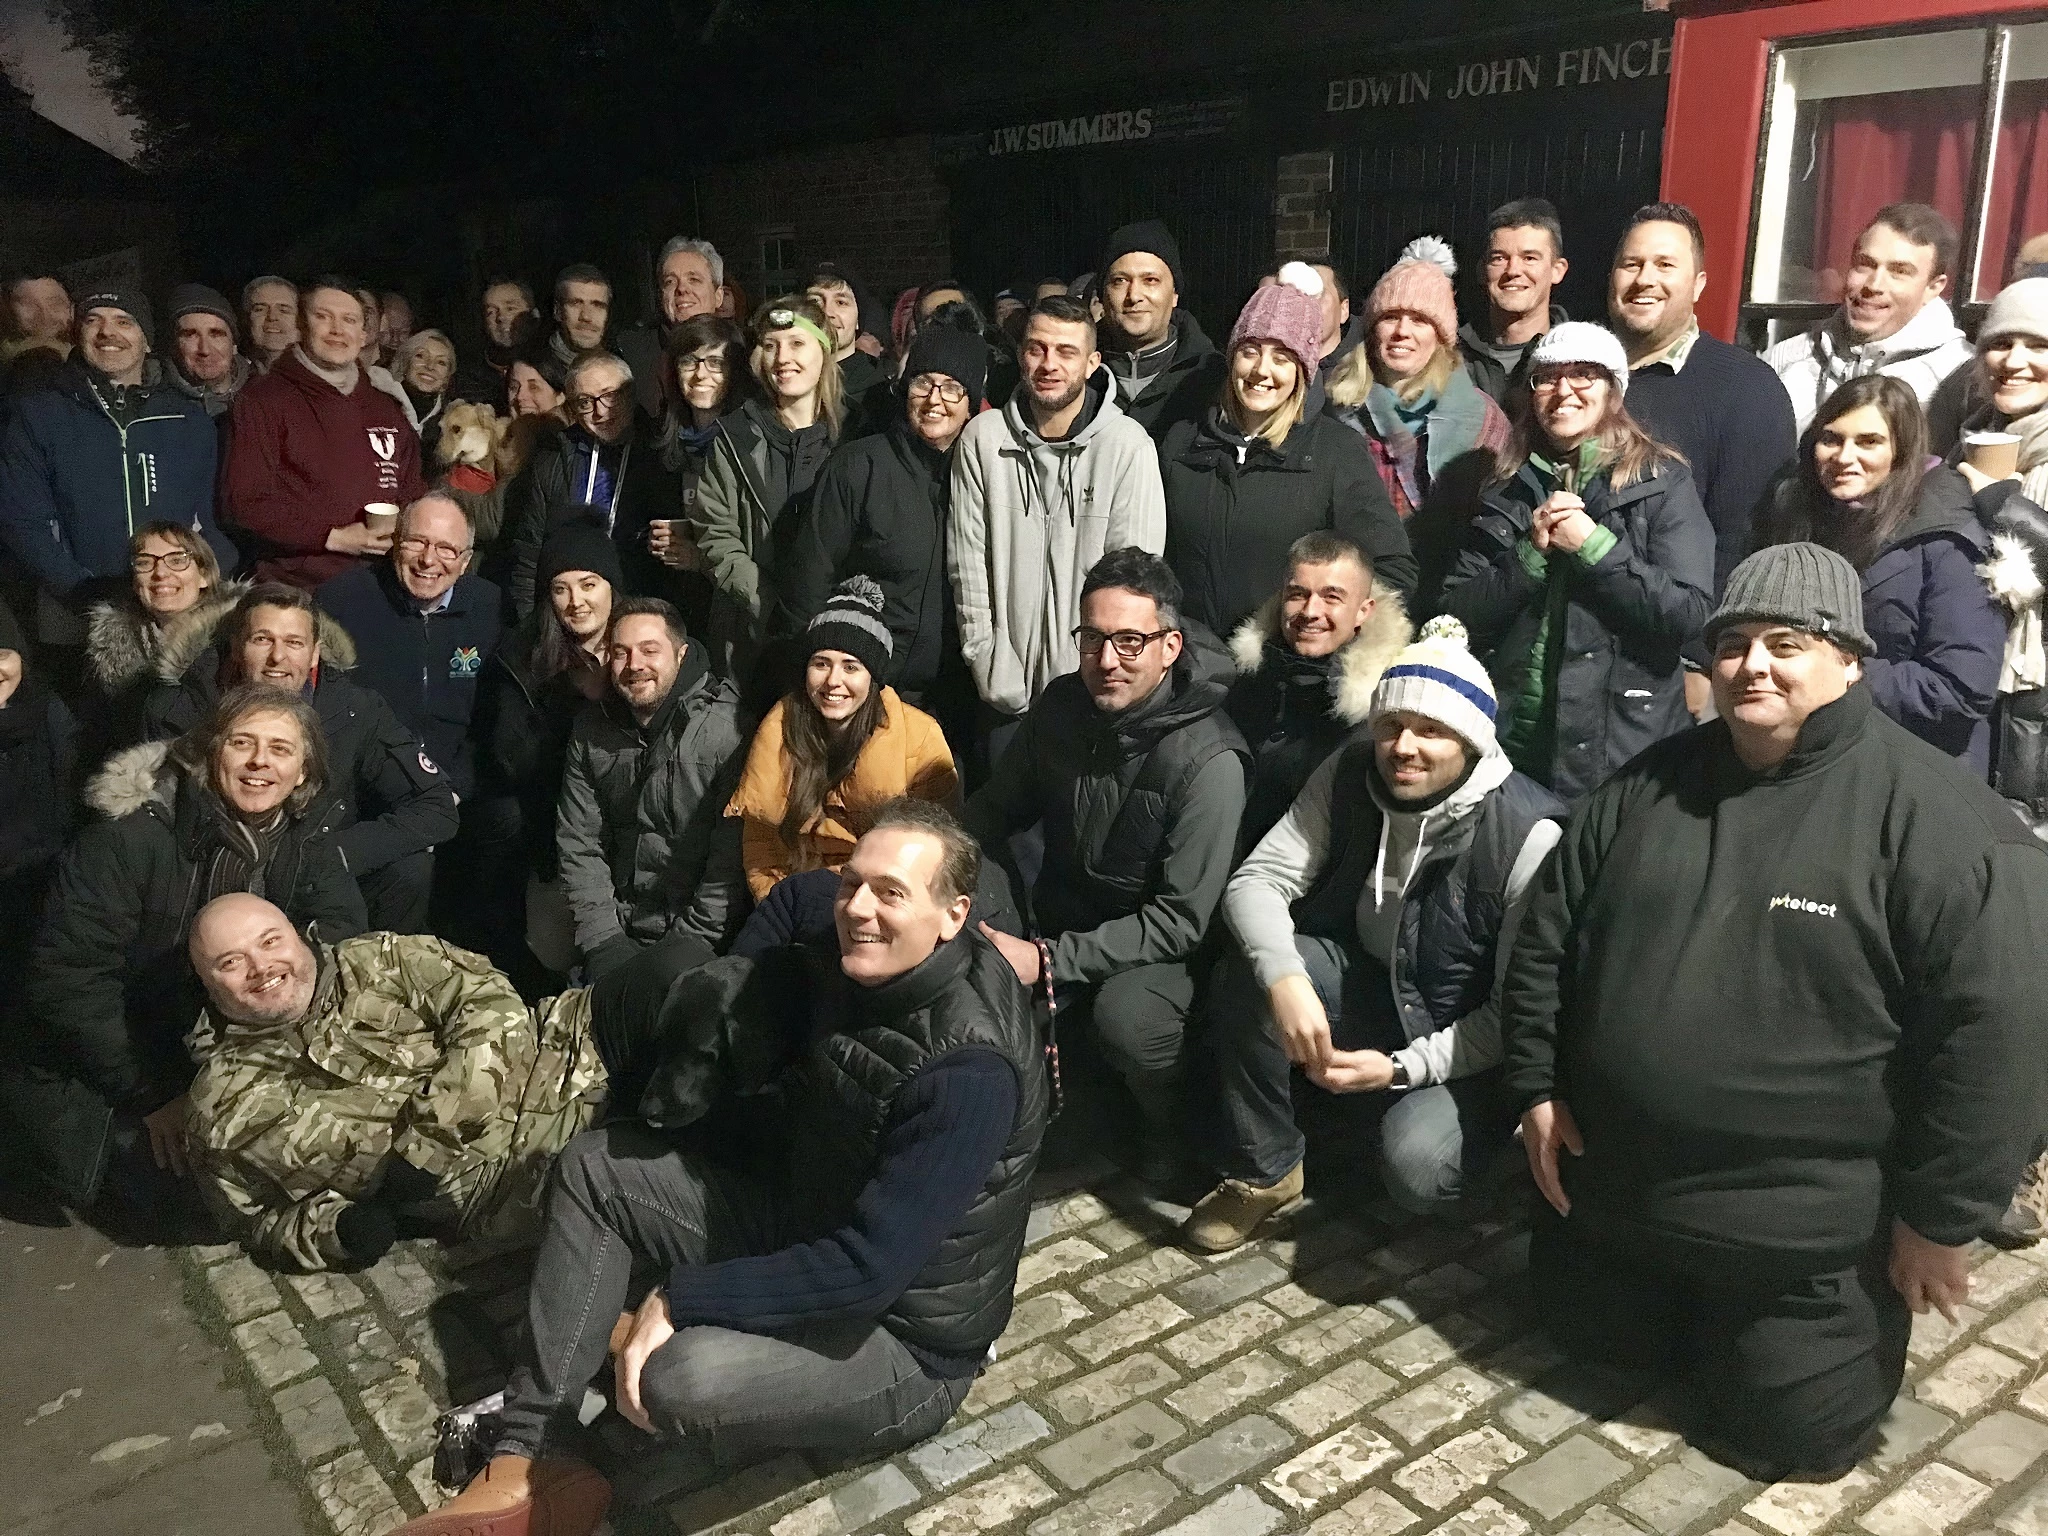 Middlesbrough’s business leaders taking part in the 2019 Sleepout event